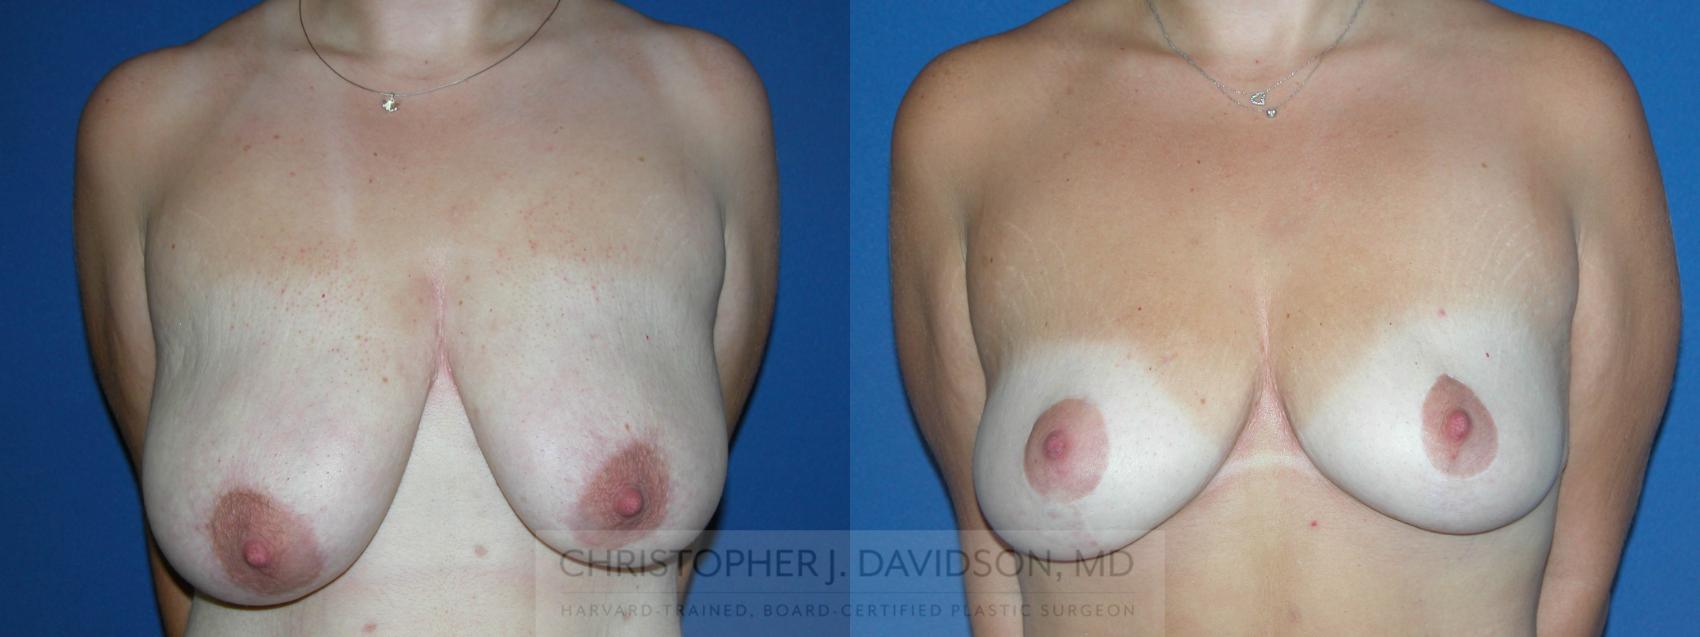 Breast Lift Case 174 Before & After View #1 | Wellesley, MA | Christopher J. Davidson, MD